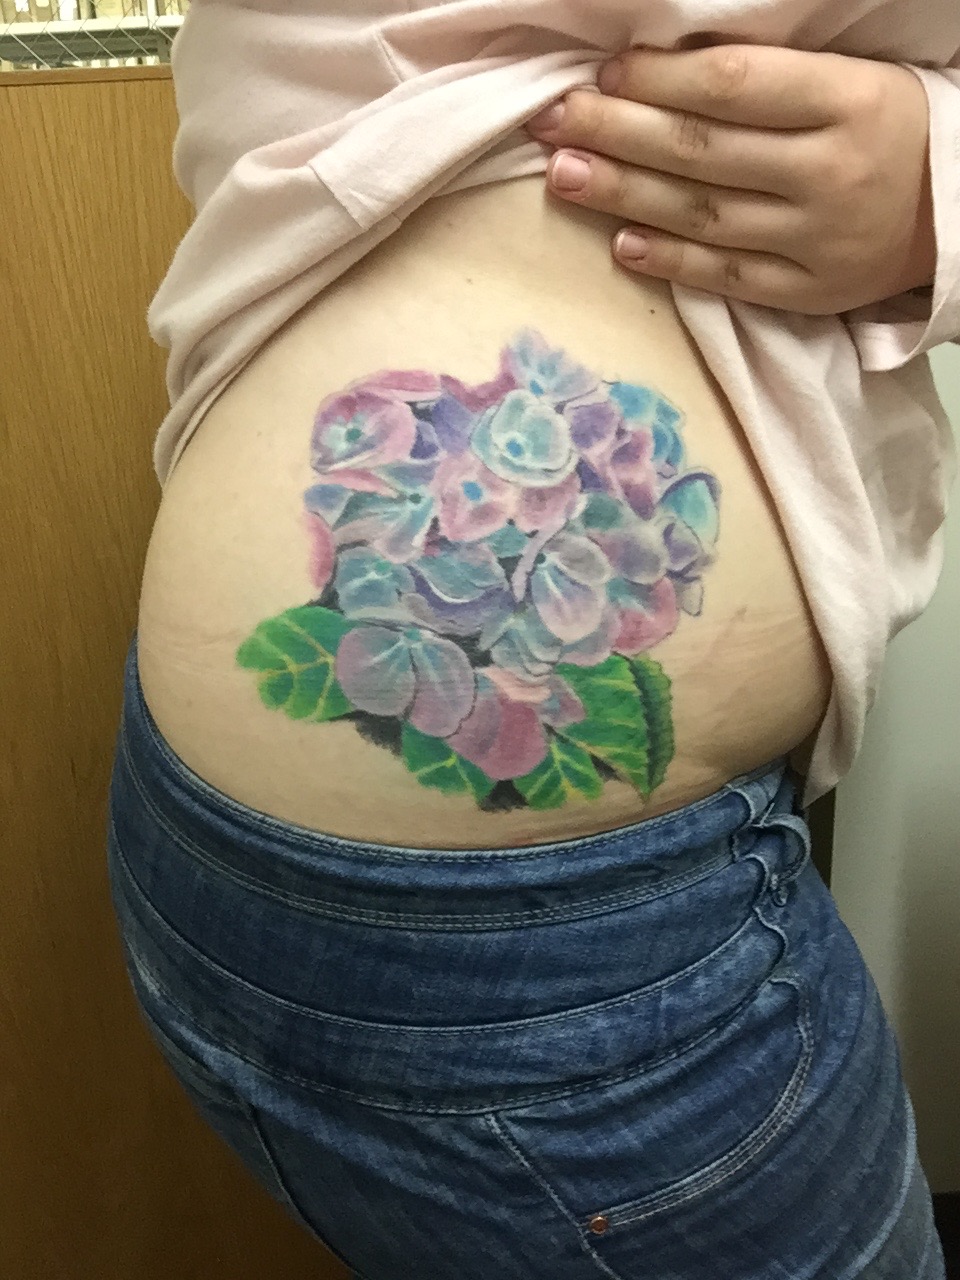 Hydrangea Tattoos Designs, Ideas and Meaning | Tattoos For You